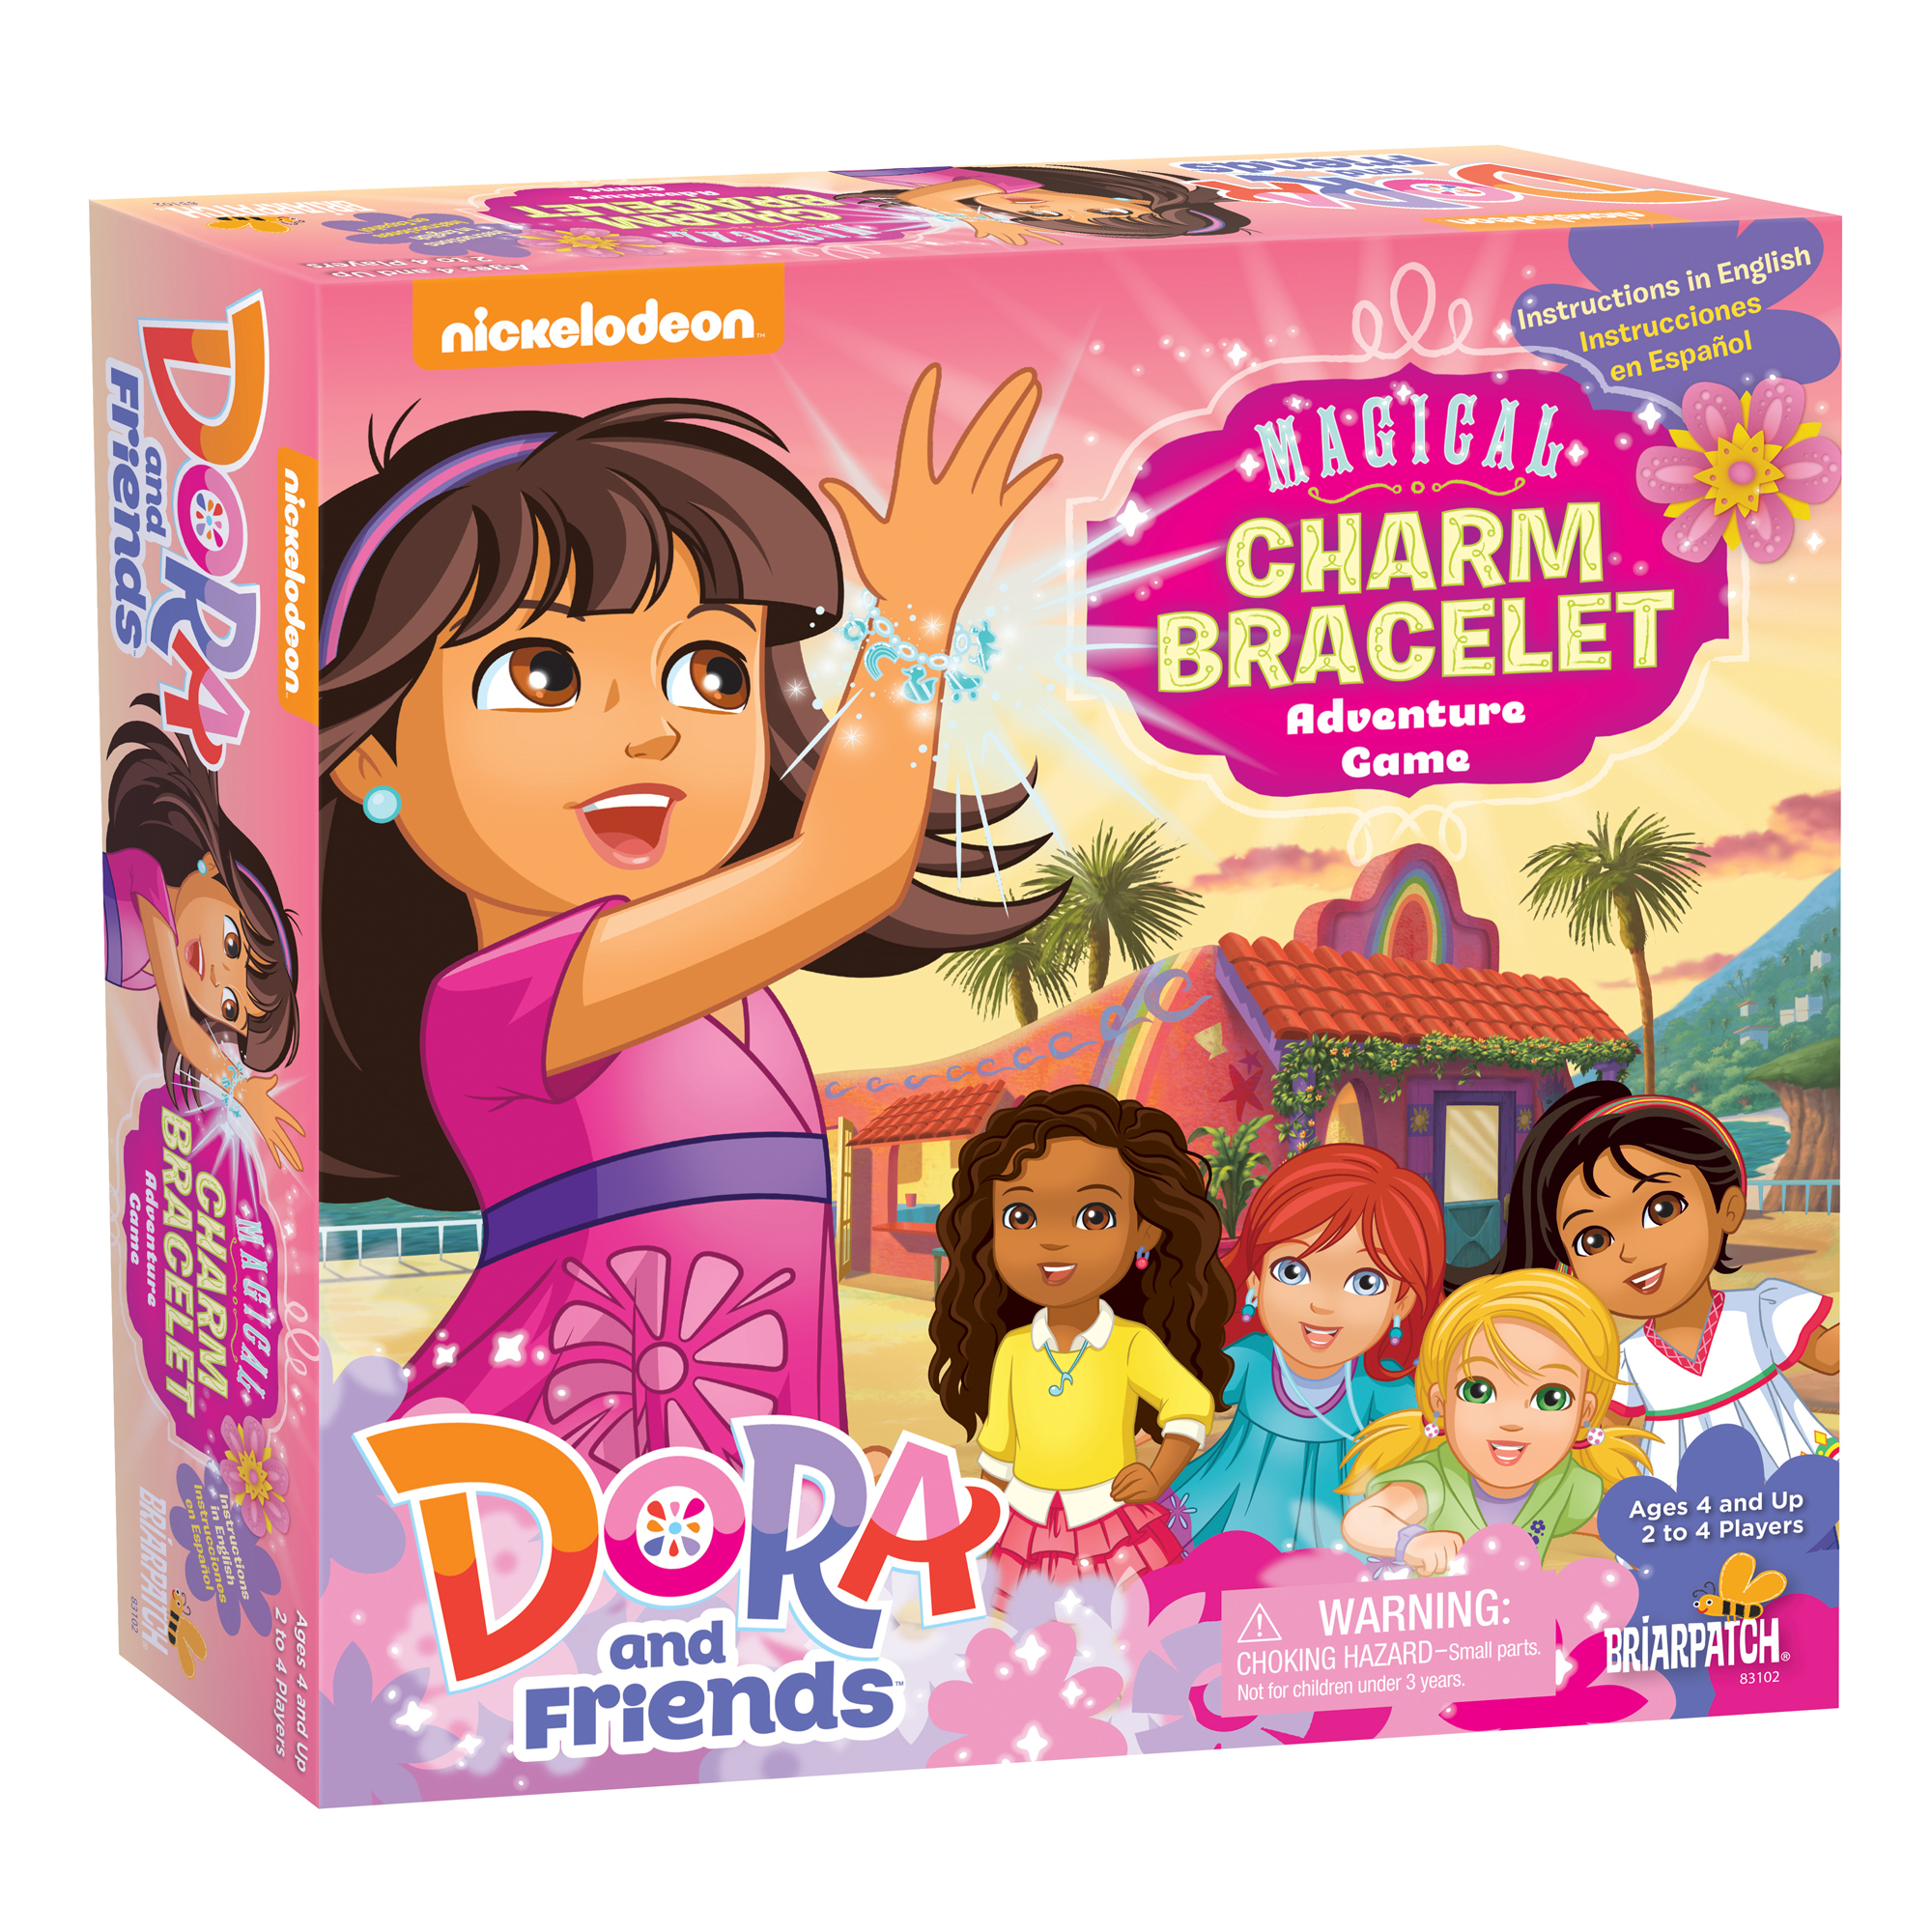 Dora and Friends Magical Charm Bracelet Adventure Game - image 1 of 5